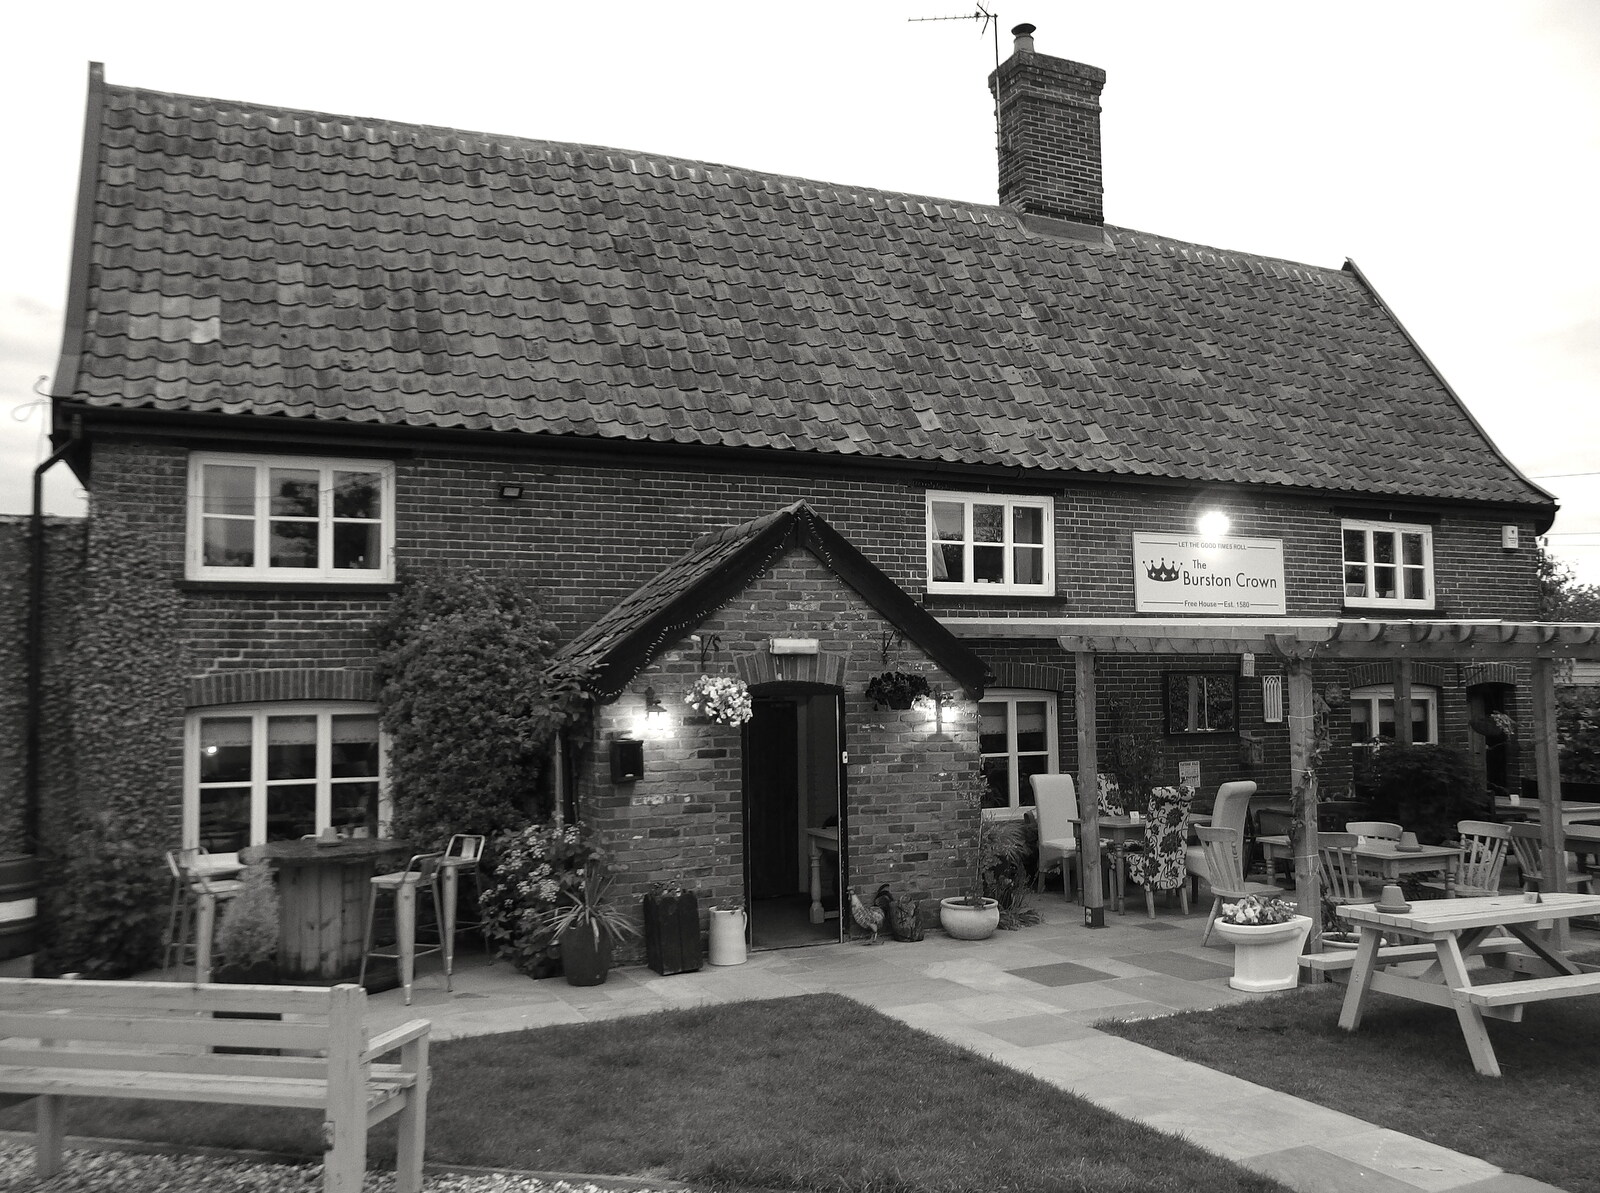 The Burston Crown pub from The BSCC at Burston and The Legend of Swallow Aquatics, East Harling, Norfolk - 15th May 2022